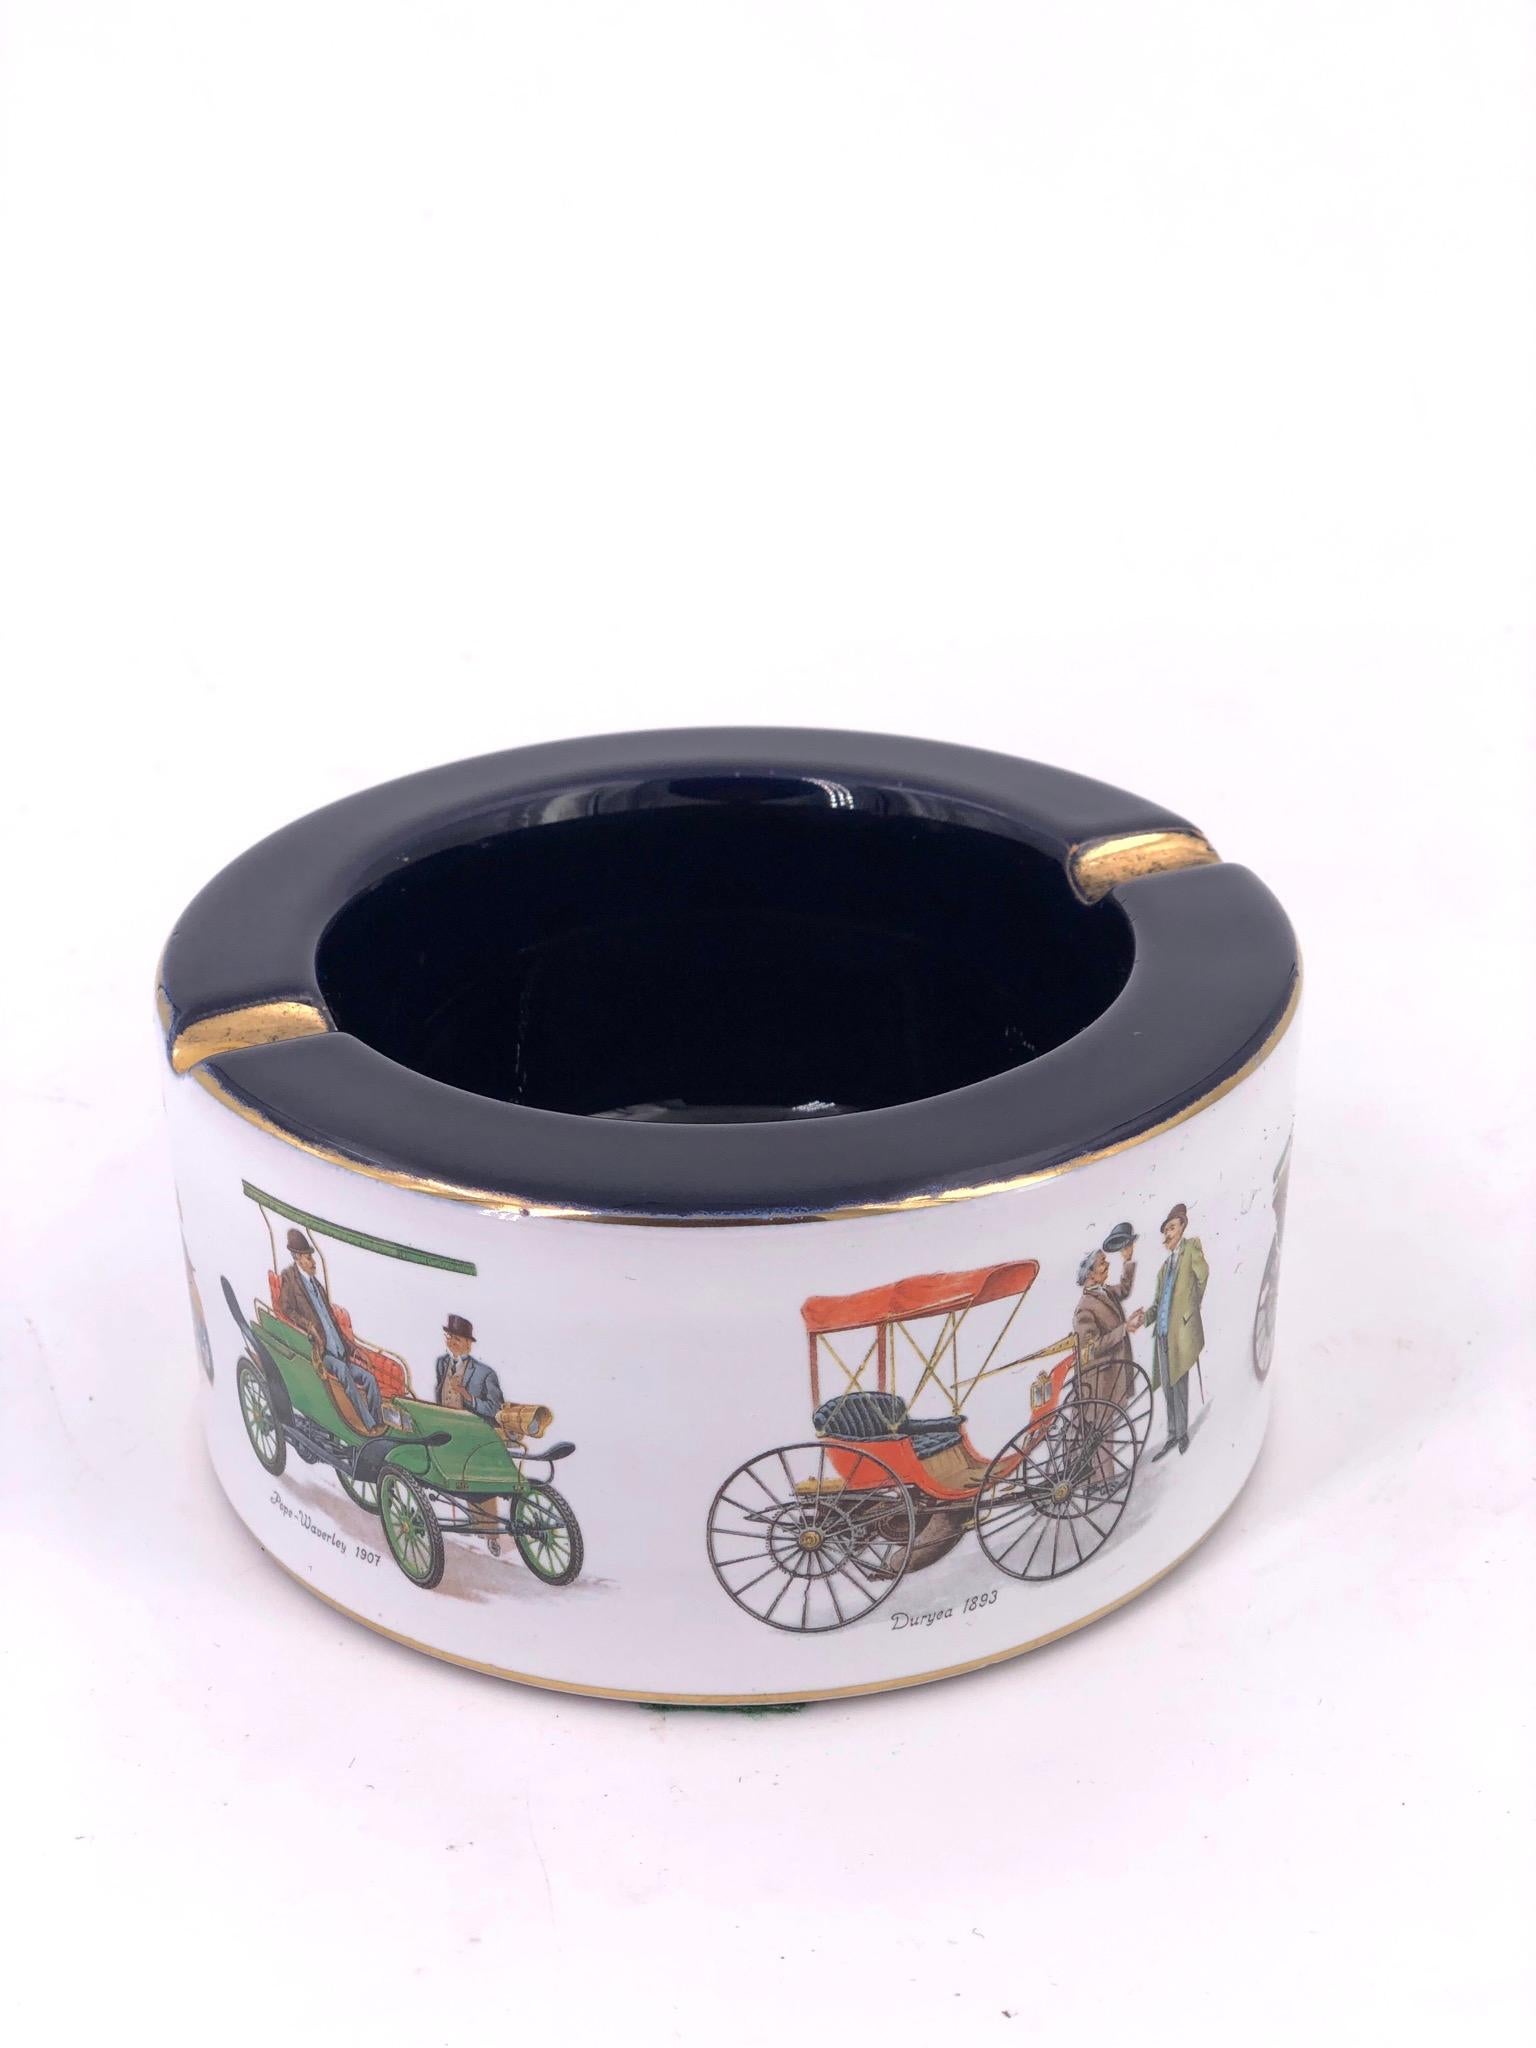 Hollywood Regency Italian Hand Painted Porcelain Ashtray with Antique Cars & Gold Accents For Sale